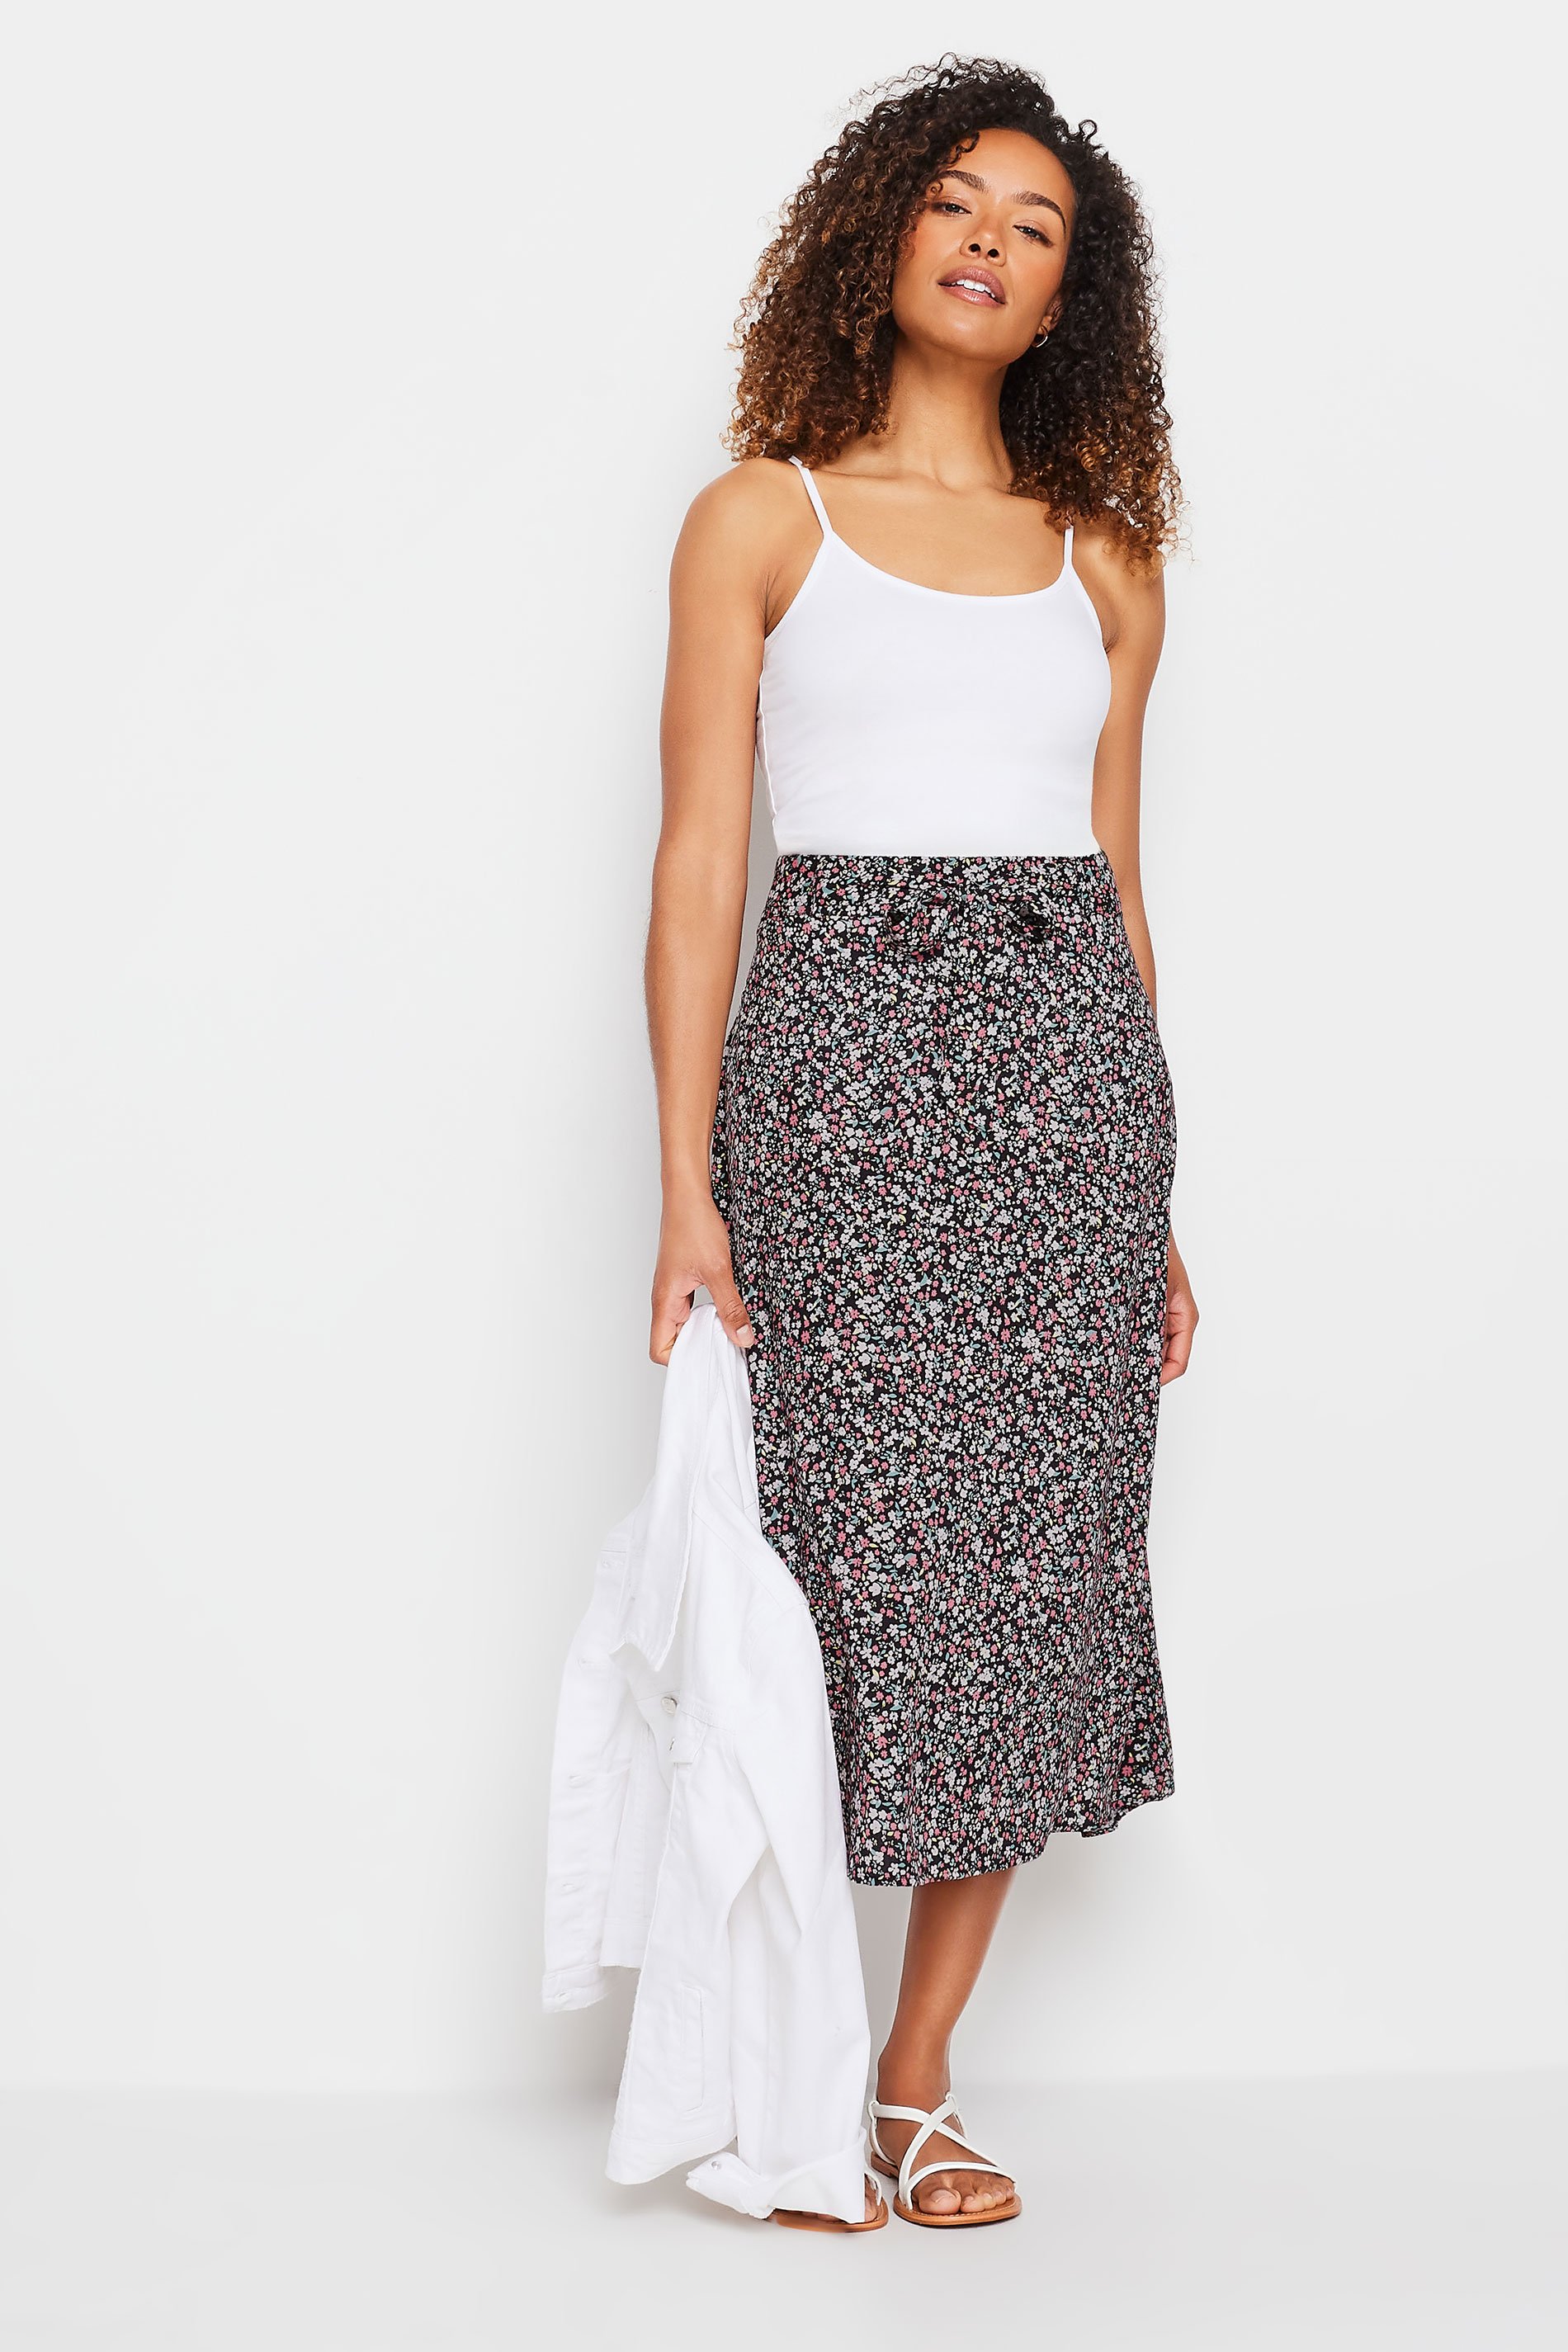 M&Co Black Ditsy Floral Print Belted Midi Skirt | M&Co 2